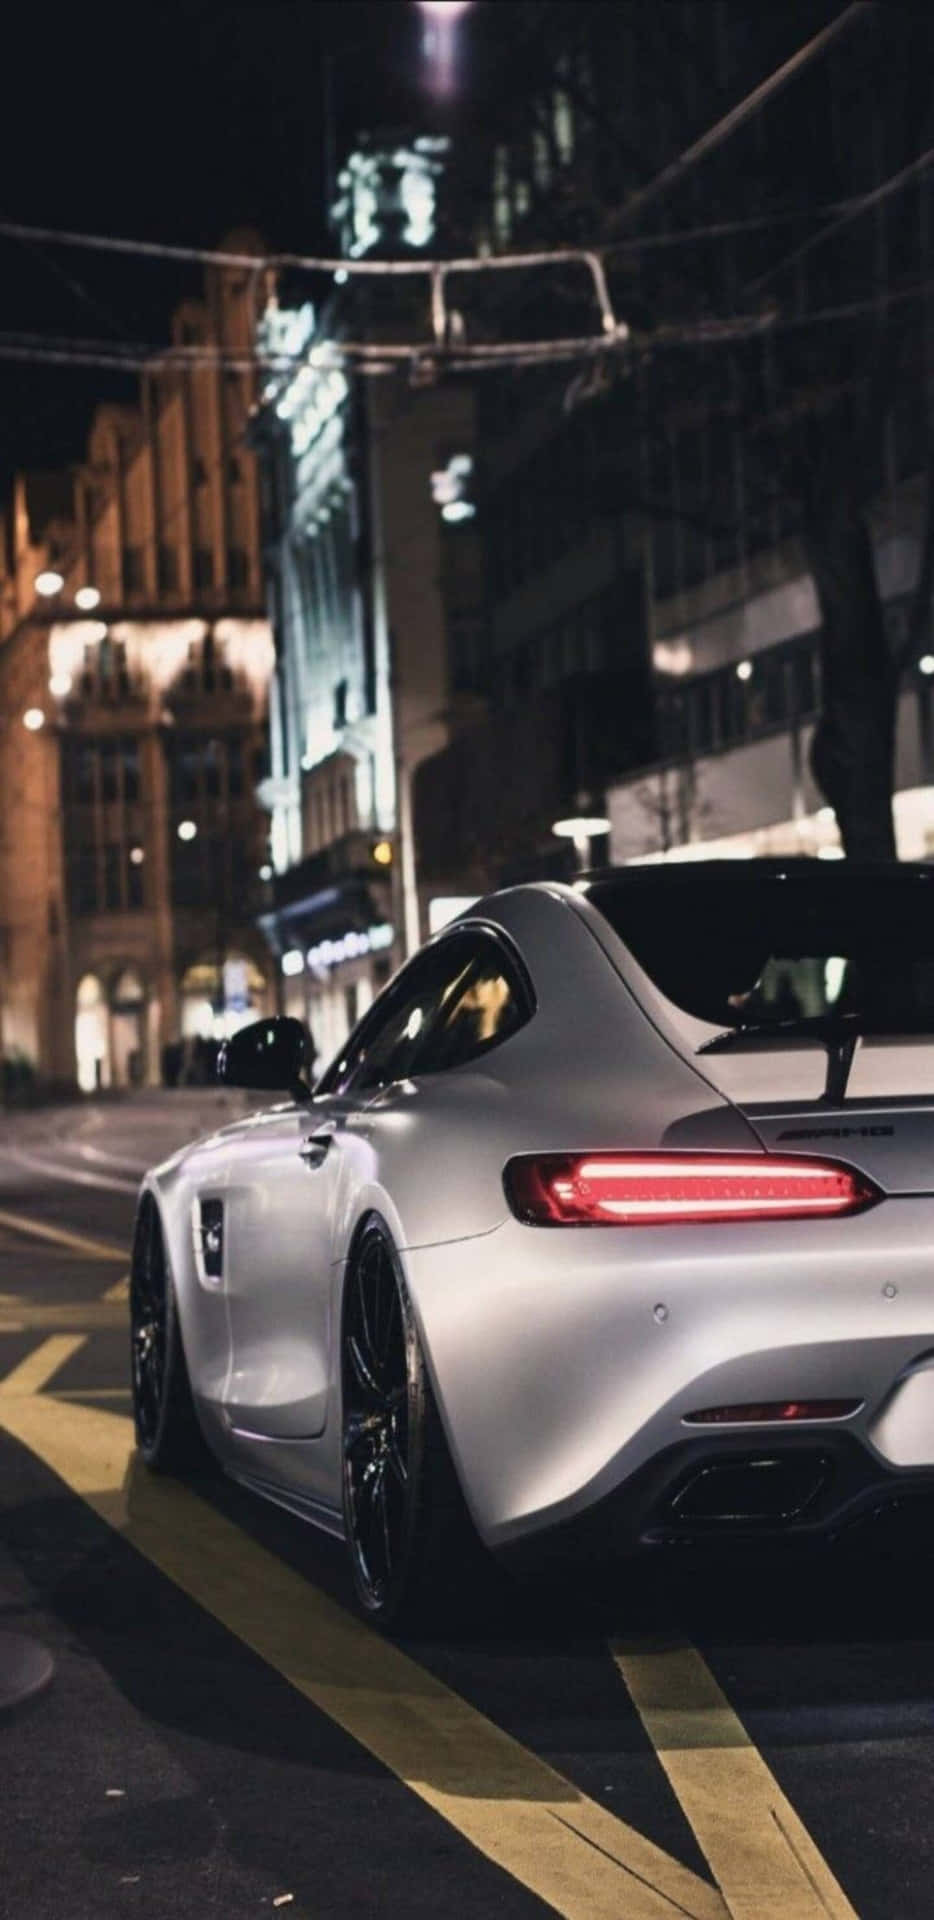 Mercedes Amg Gt Parked On The Street At Night